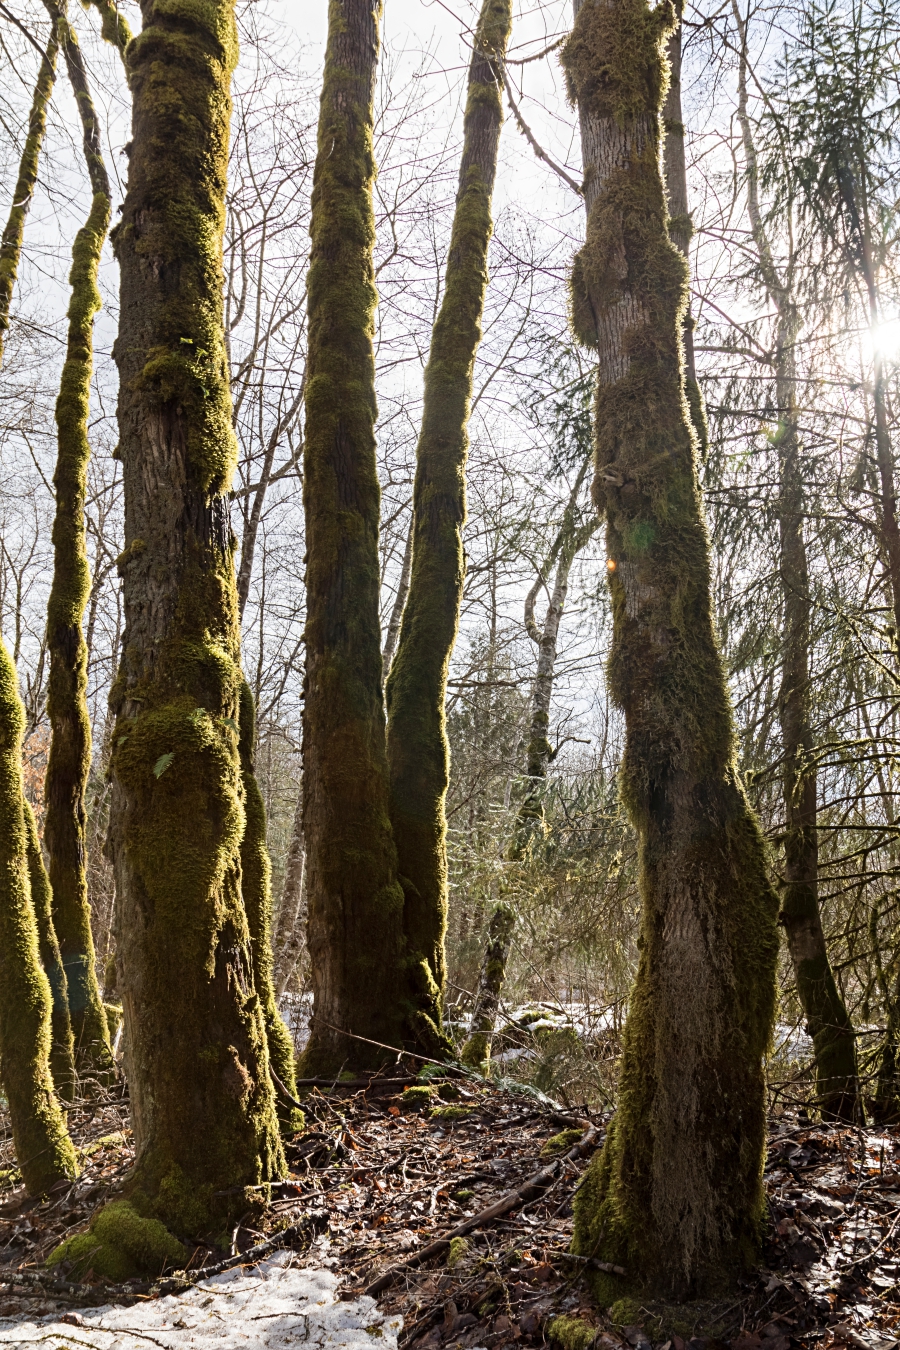 Squamish River Estuary, moss covered trees in forest